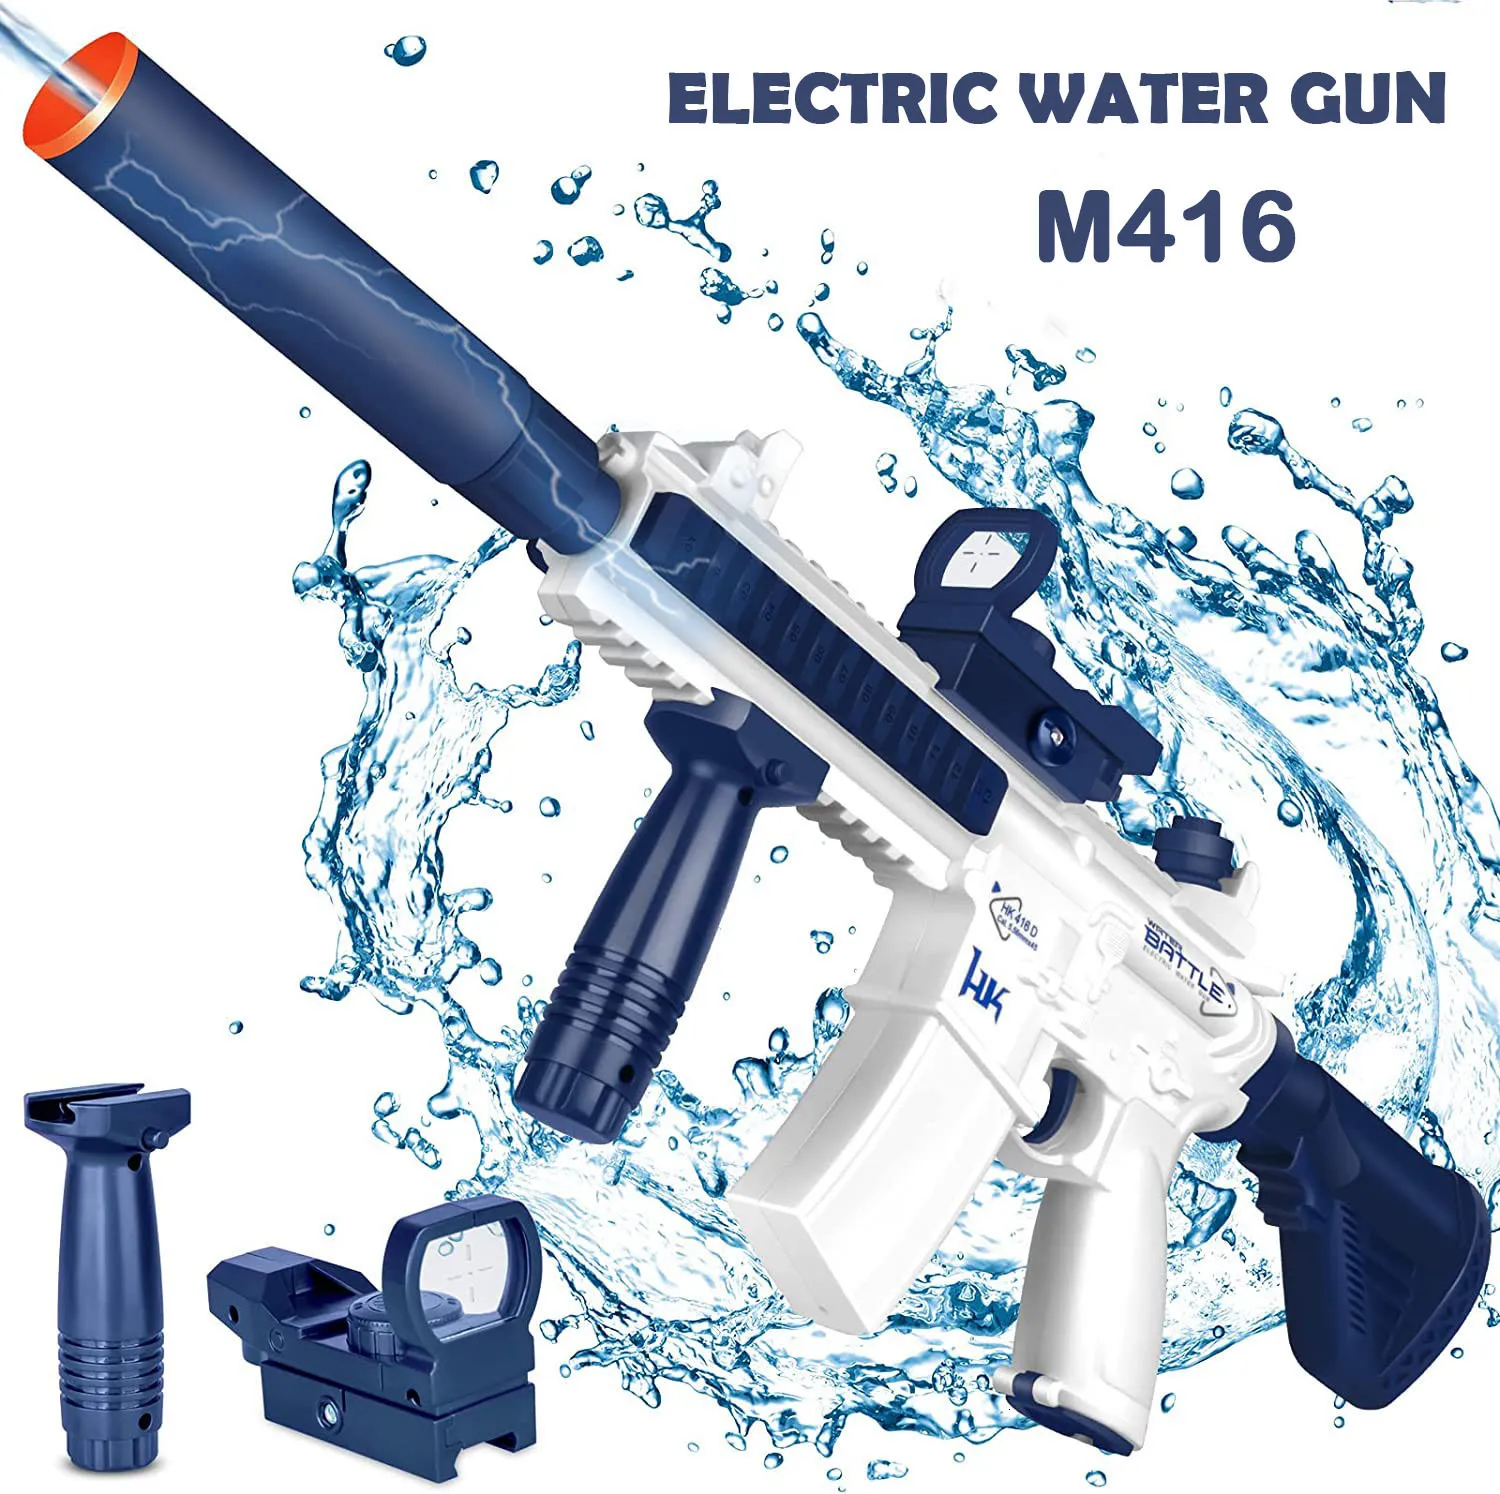 Sand Play Water Fun Gun Electric Toy M416 Super Automatic Guns Glock Swimming Beach Party Game Outdoor Fighting for Kids Gift 230617